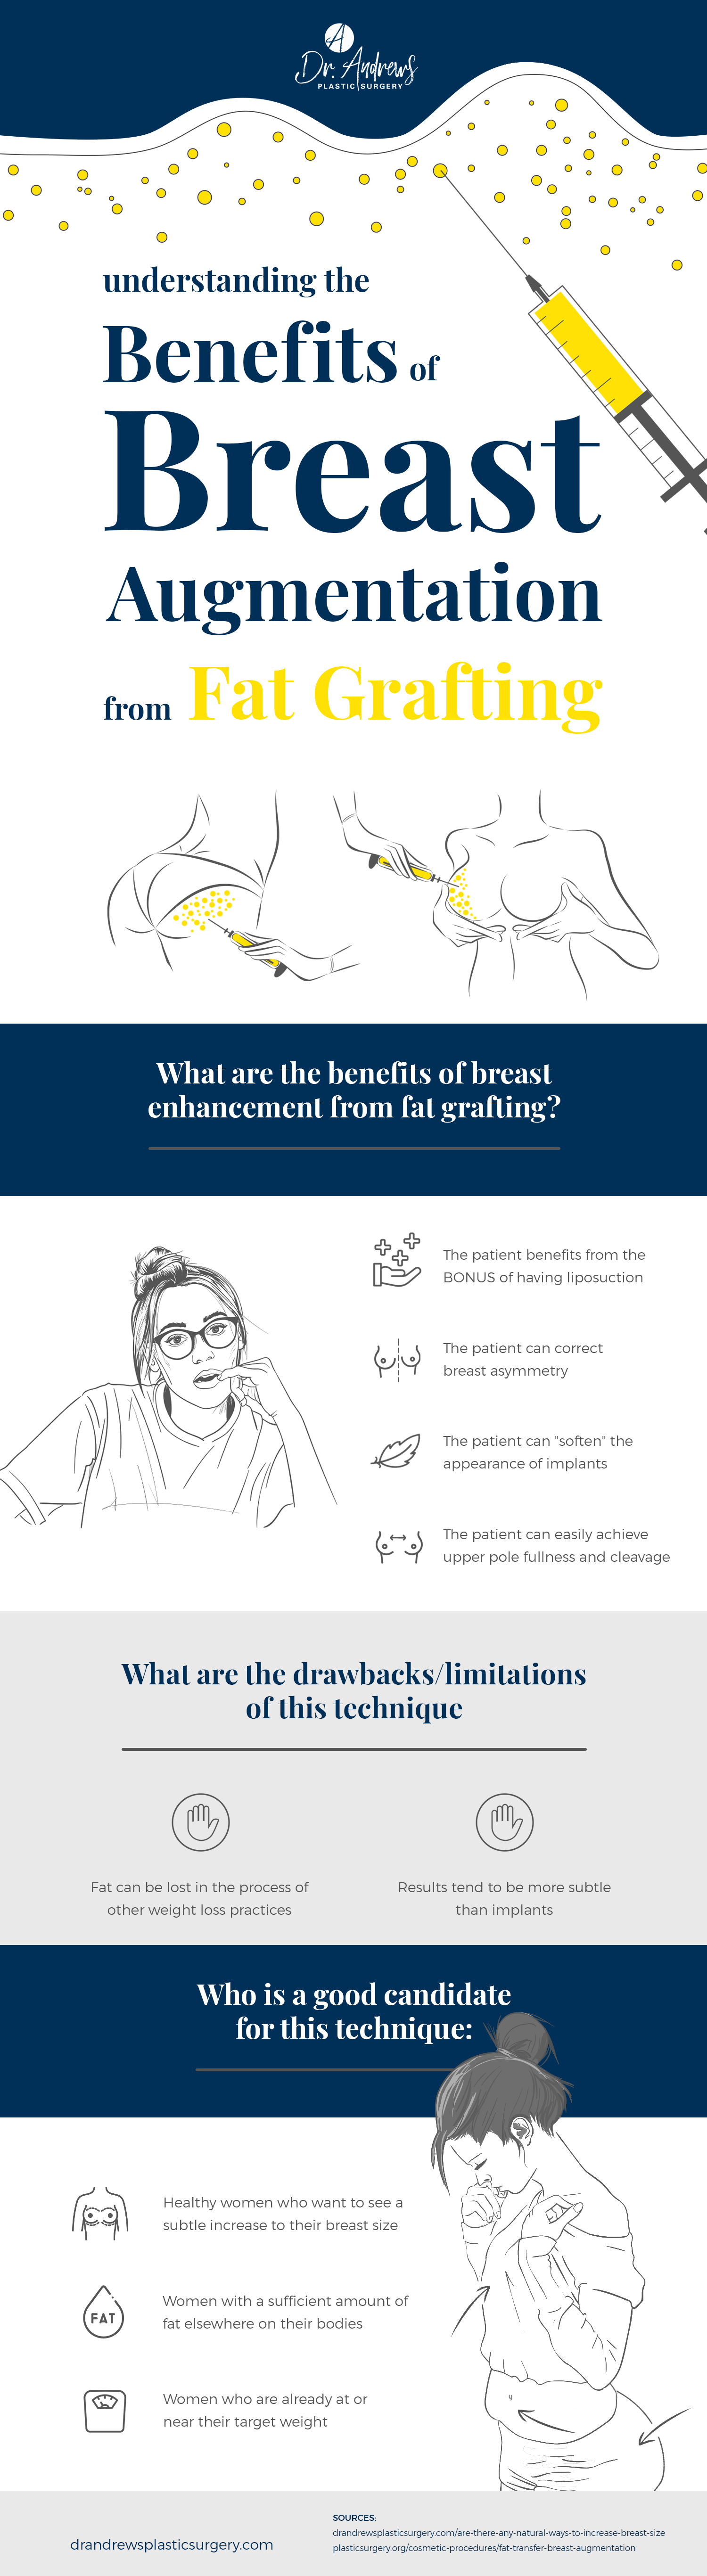 Are There Any Natural Ways to Increase Breast Size?